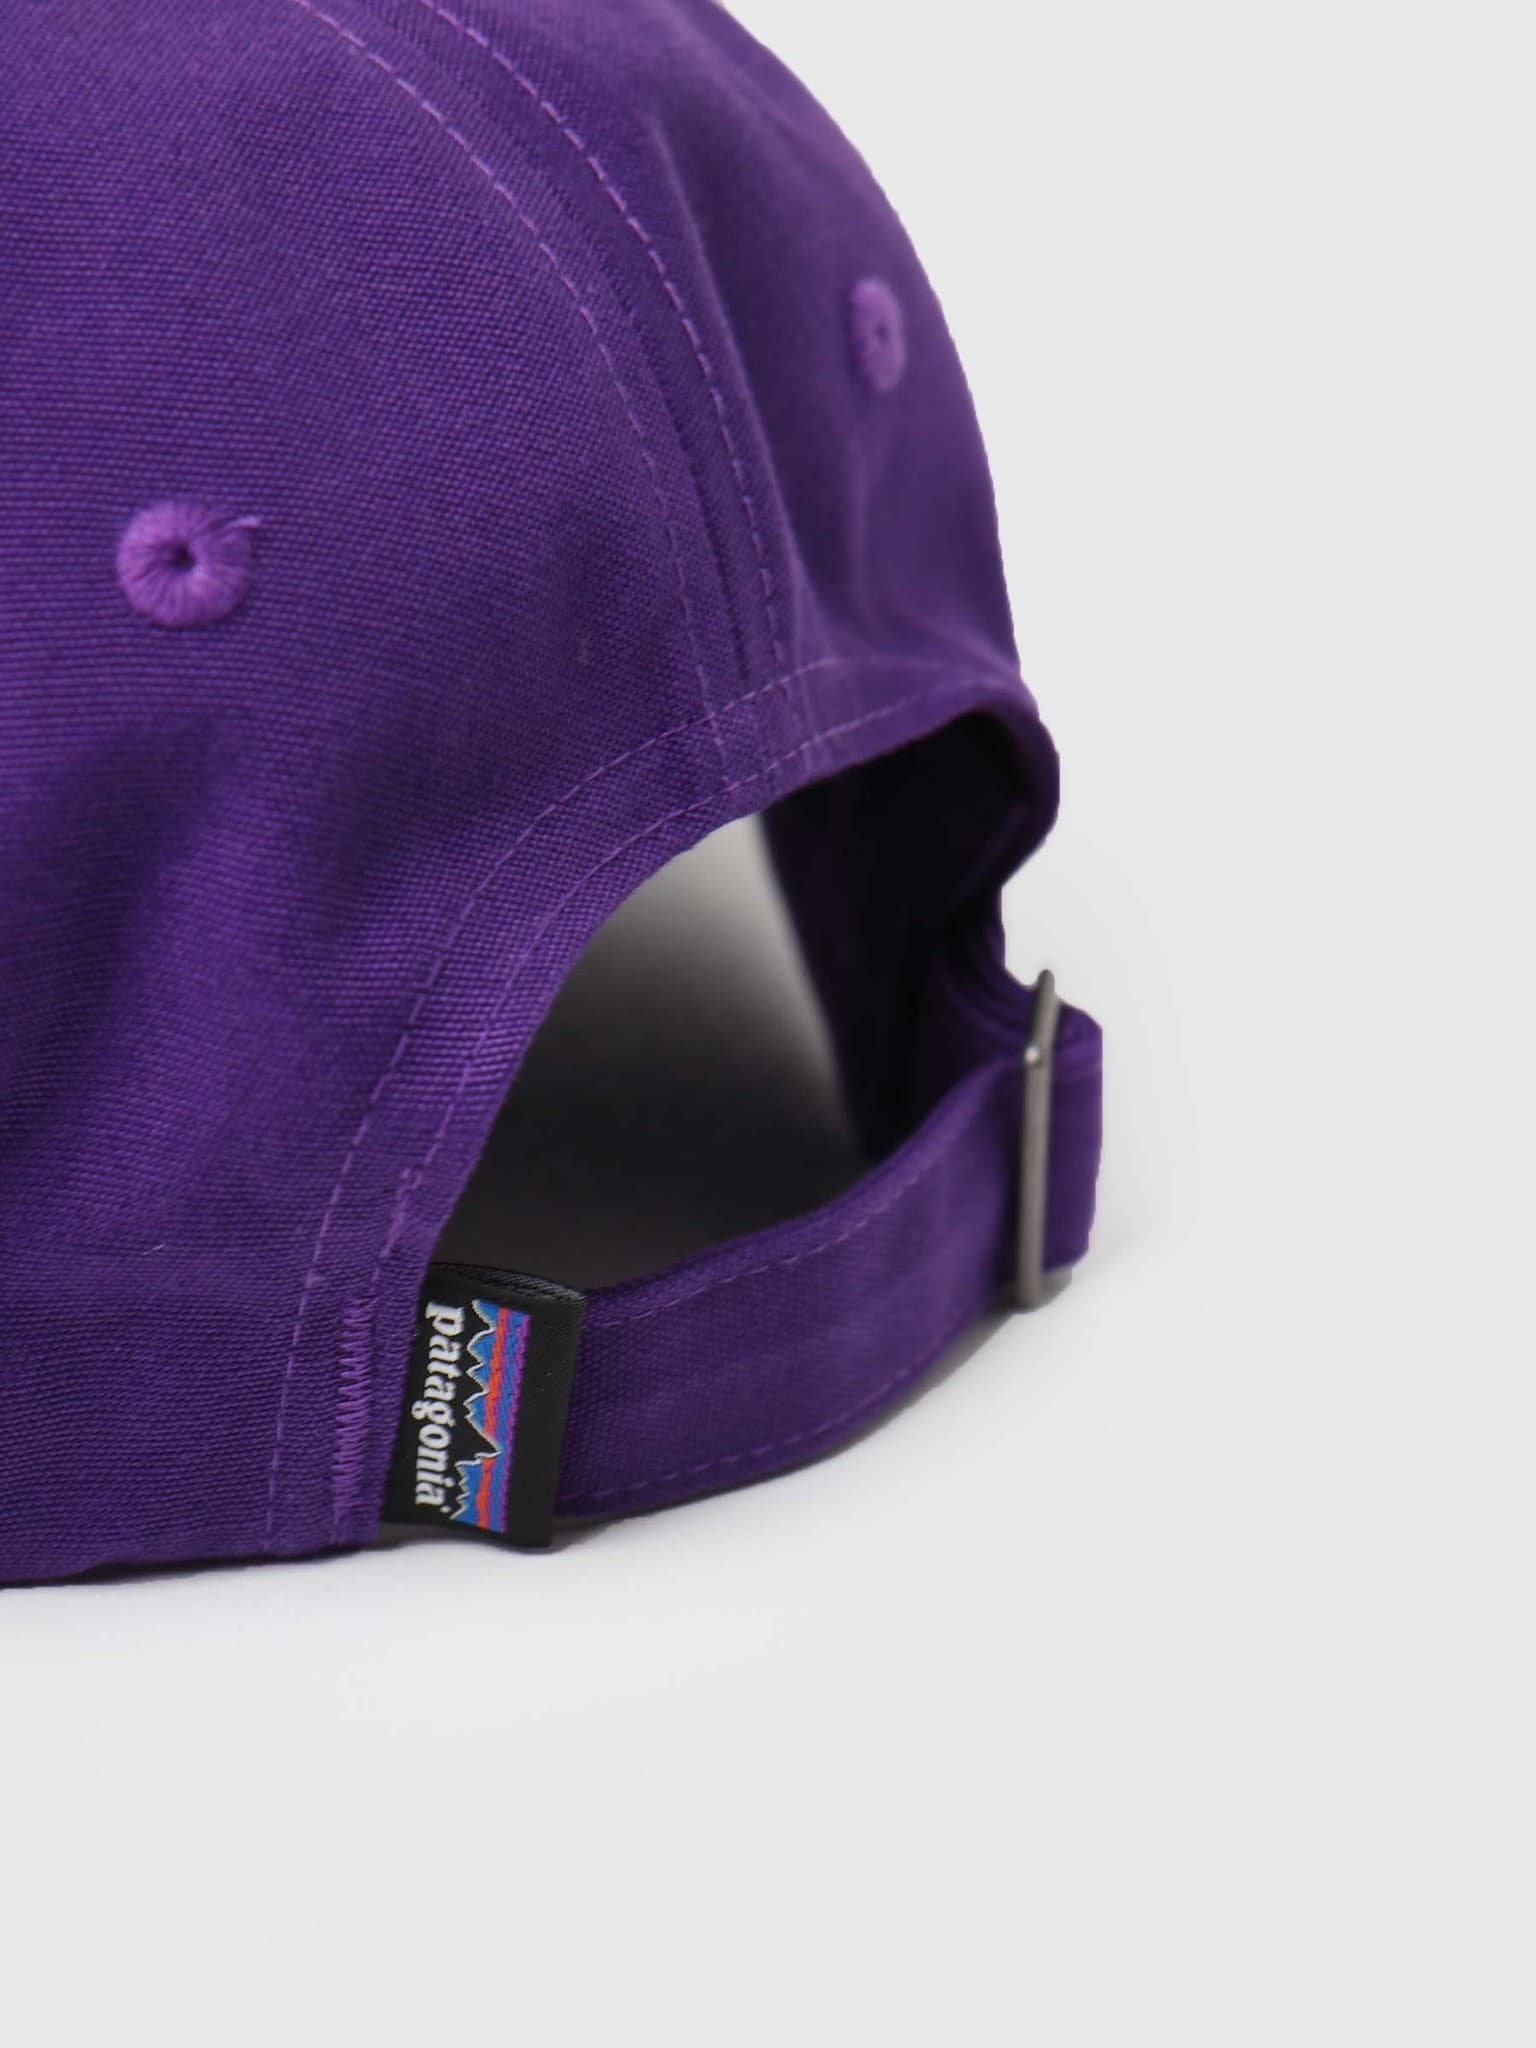 Together for the Planet Label Trad Cap Purple 38320